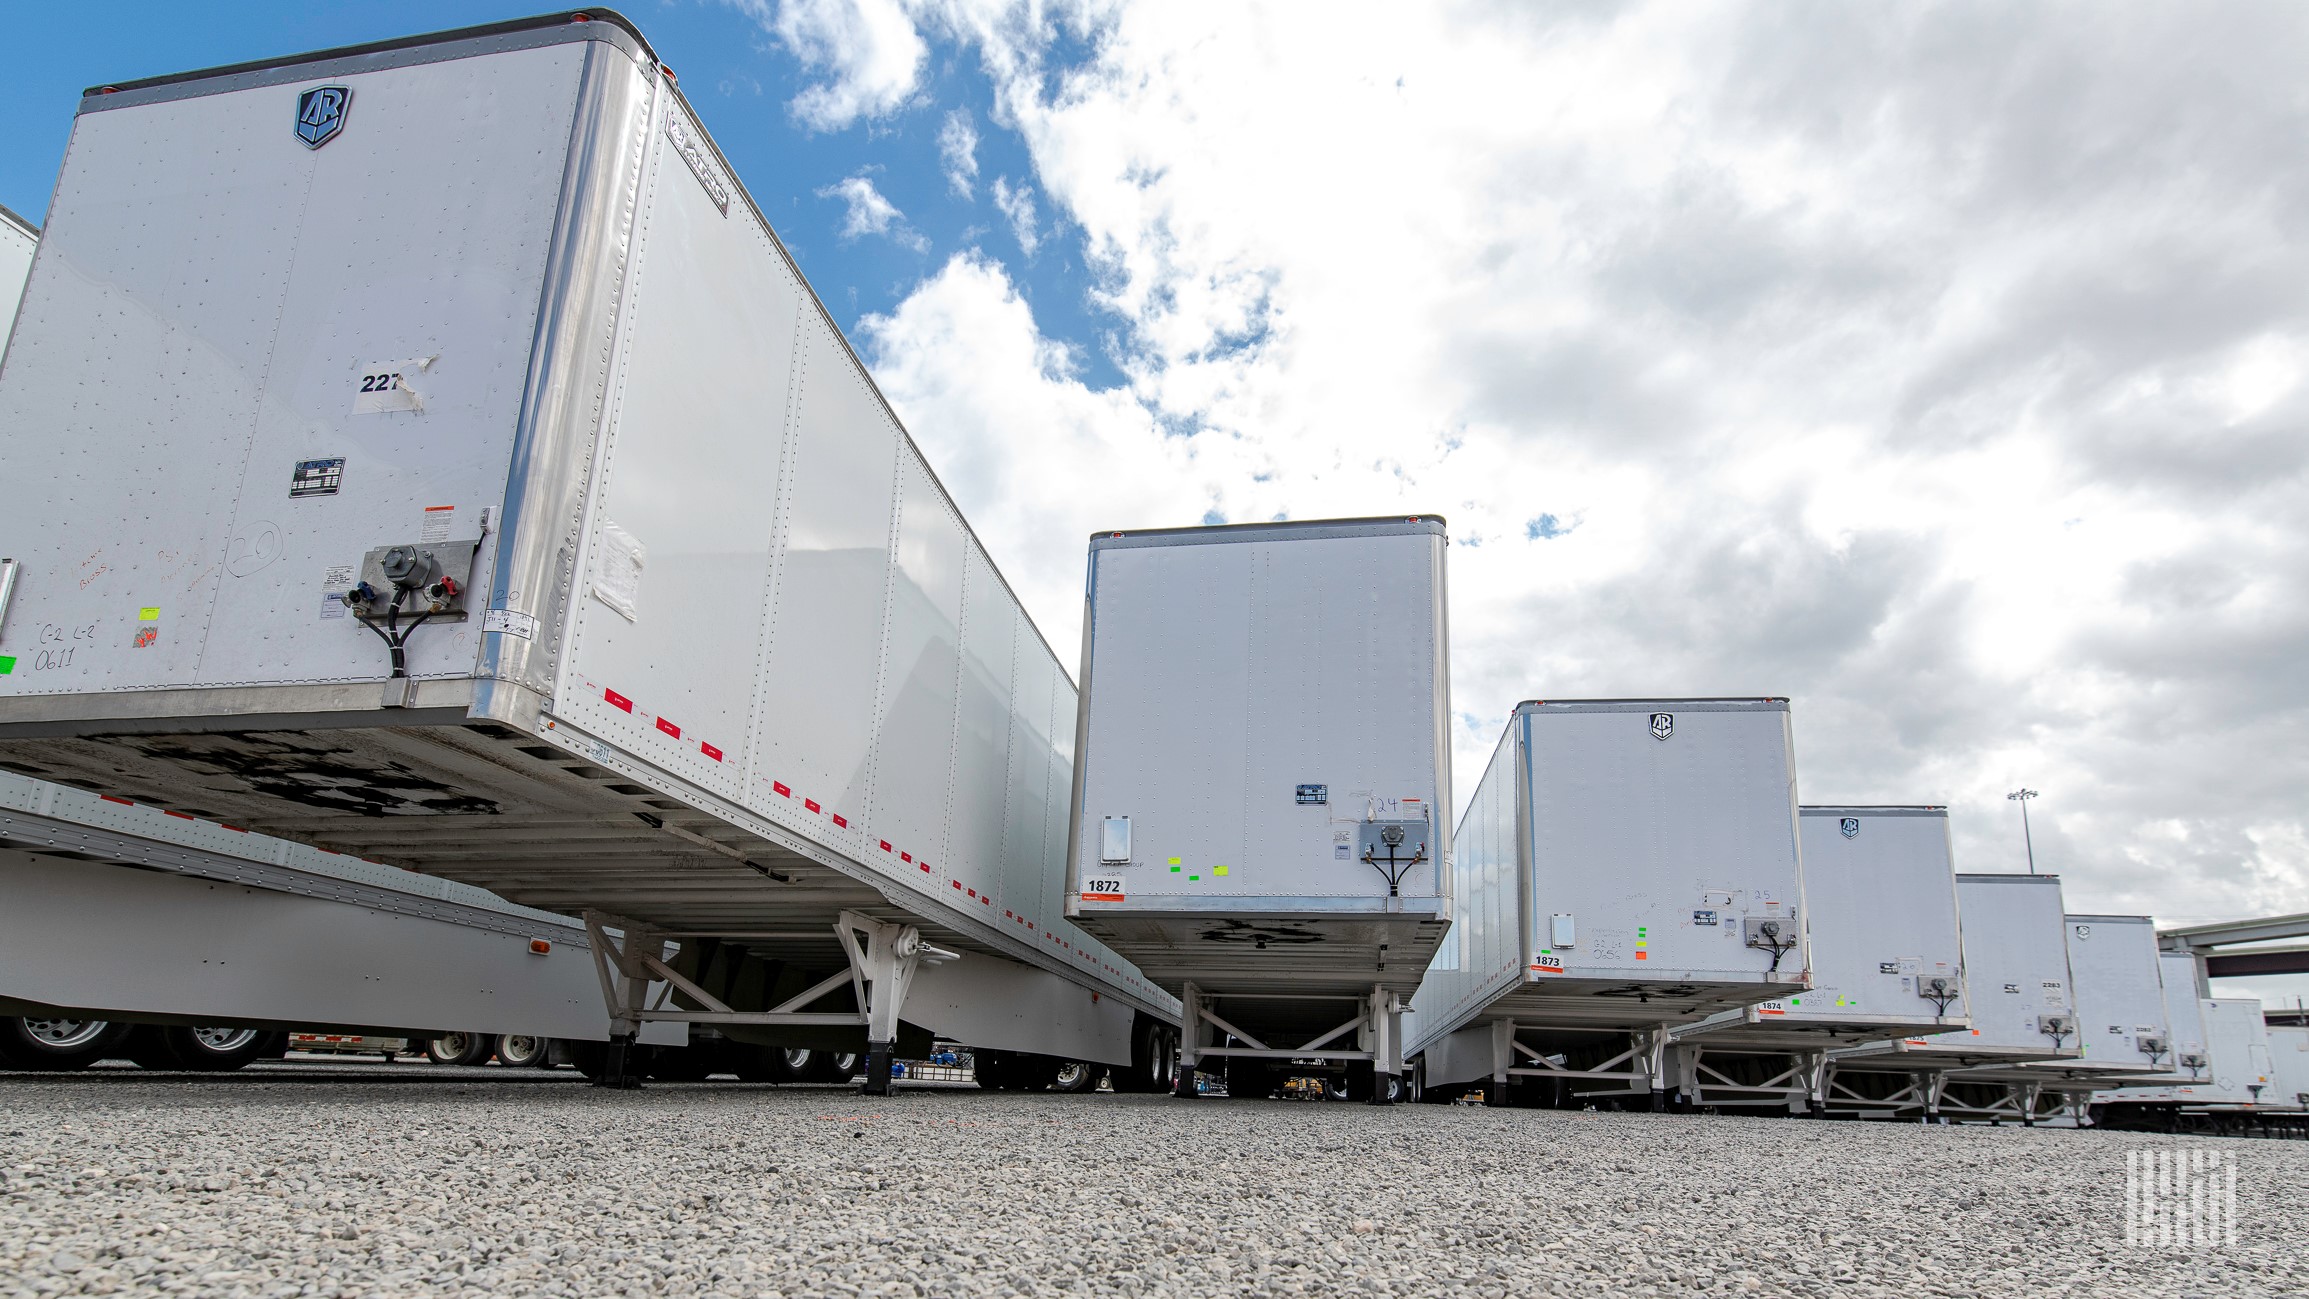 Used trailers in a row at a Ritchie Brothers auction in Houston